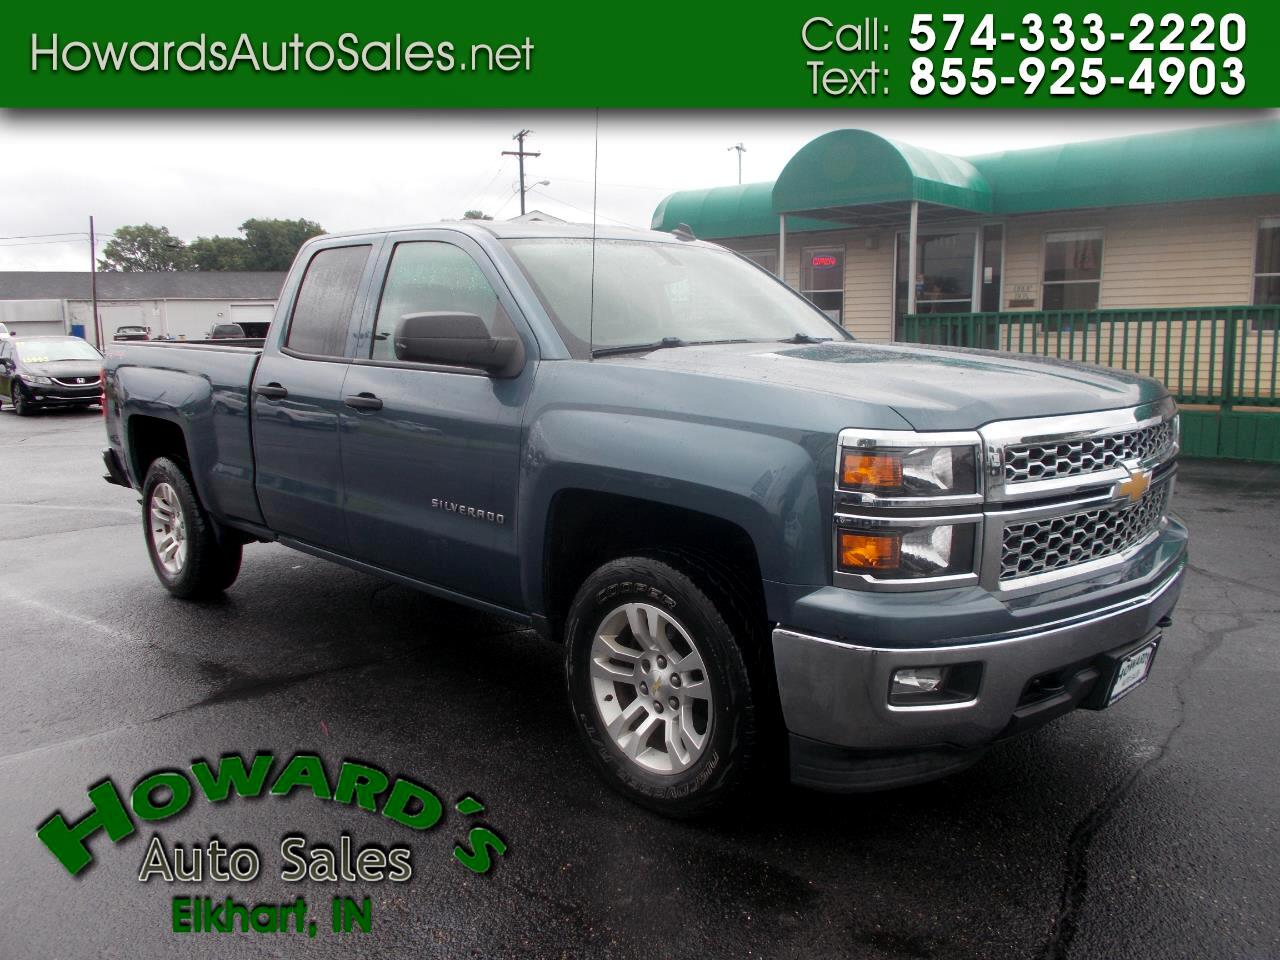 Used 14 Chevrolet Silverado 1500 2lt Double Cab 4wd For Sale In Elkhart In Howards Auto Sales Elkhart